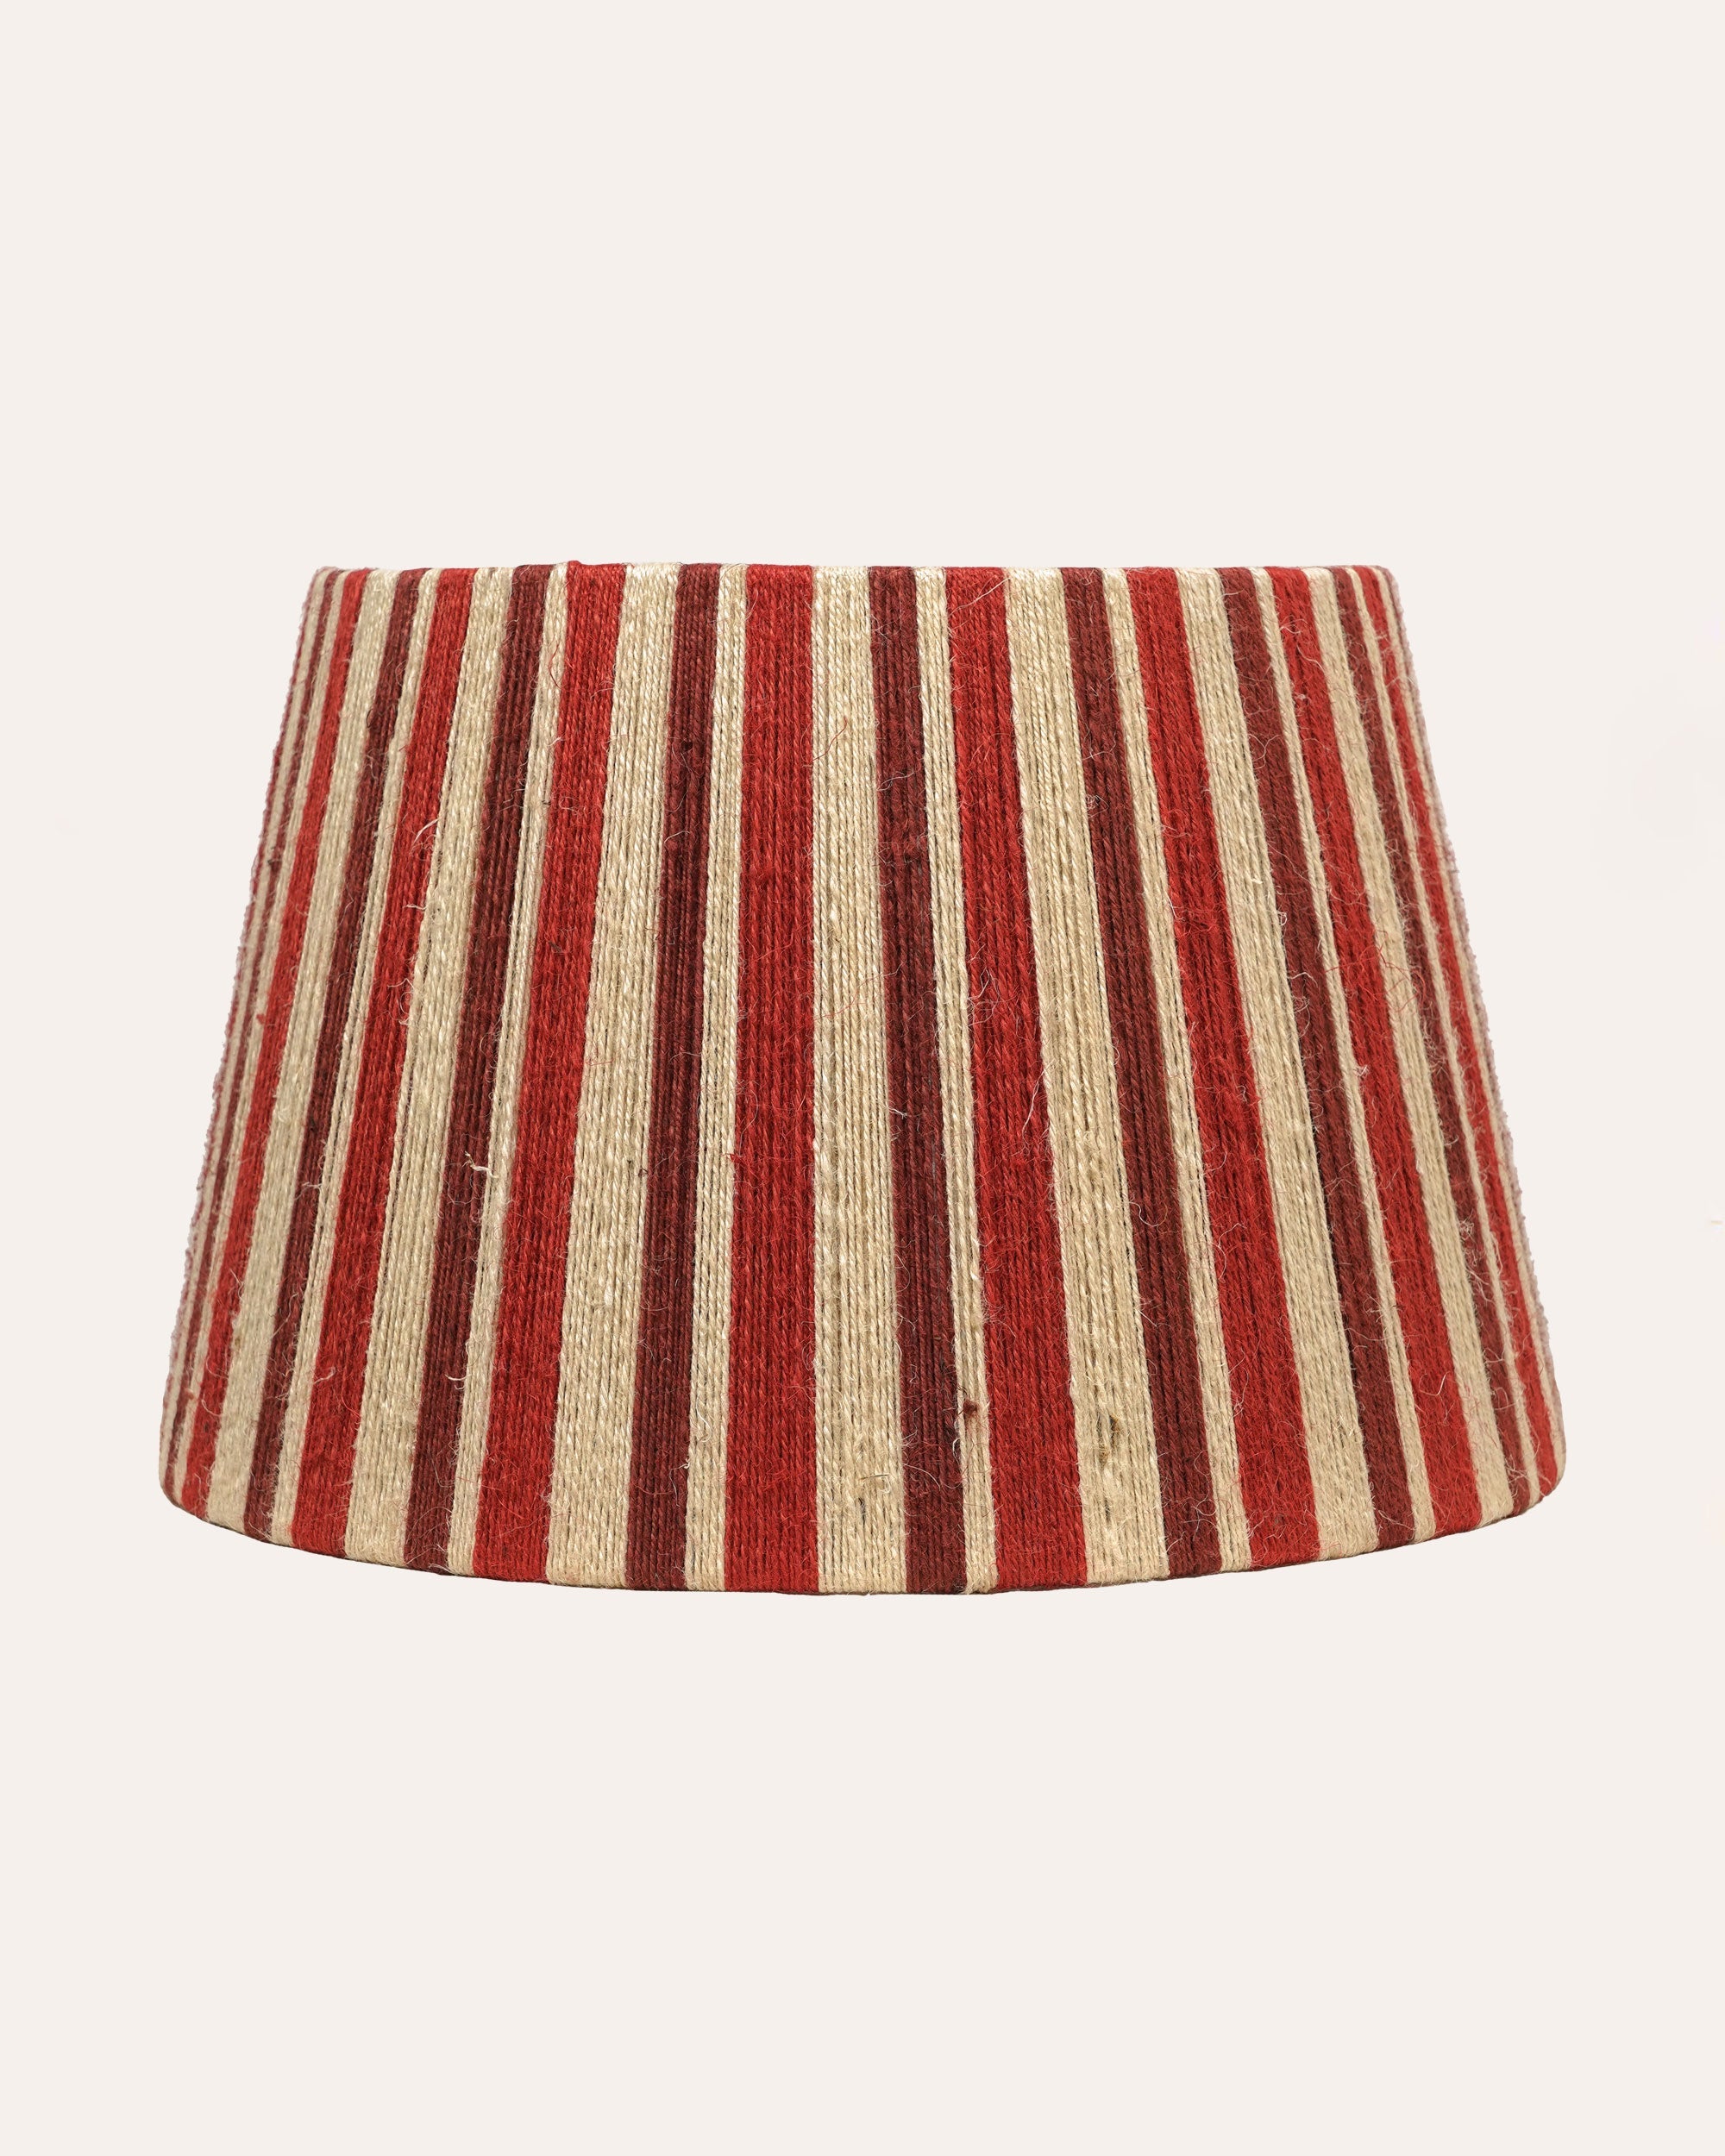 The Stripey String Lampshade - The Red